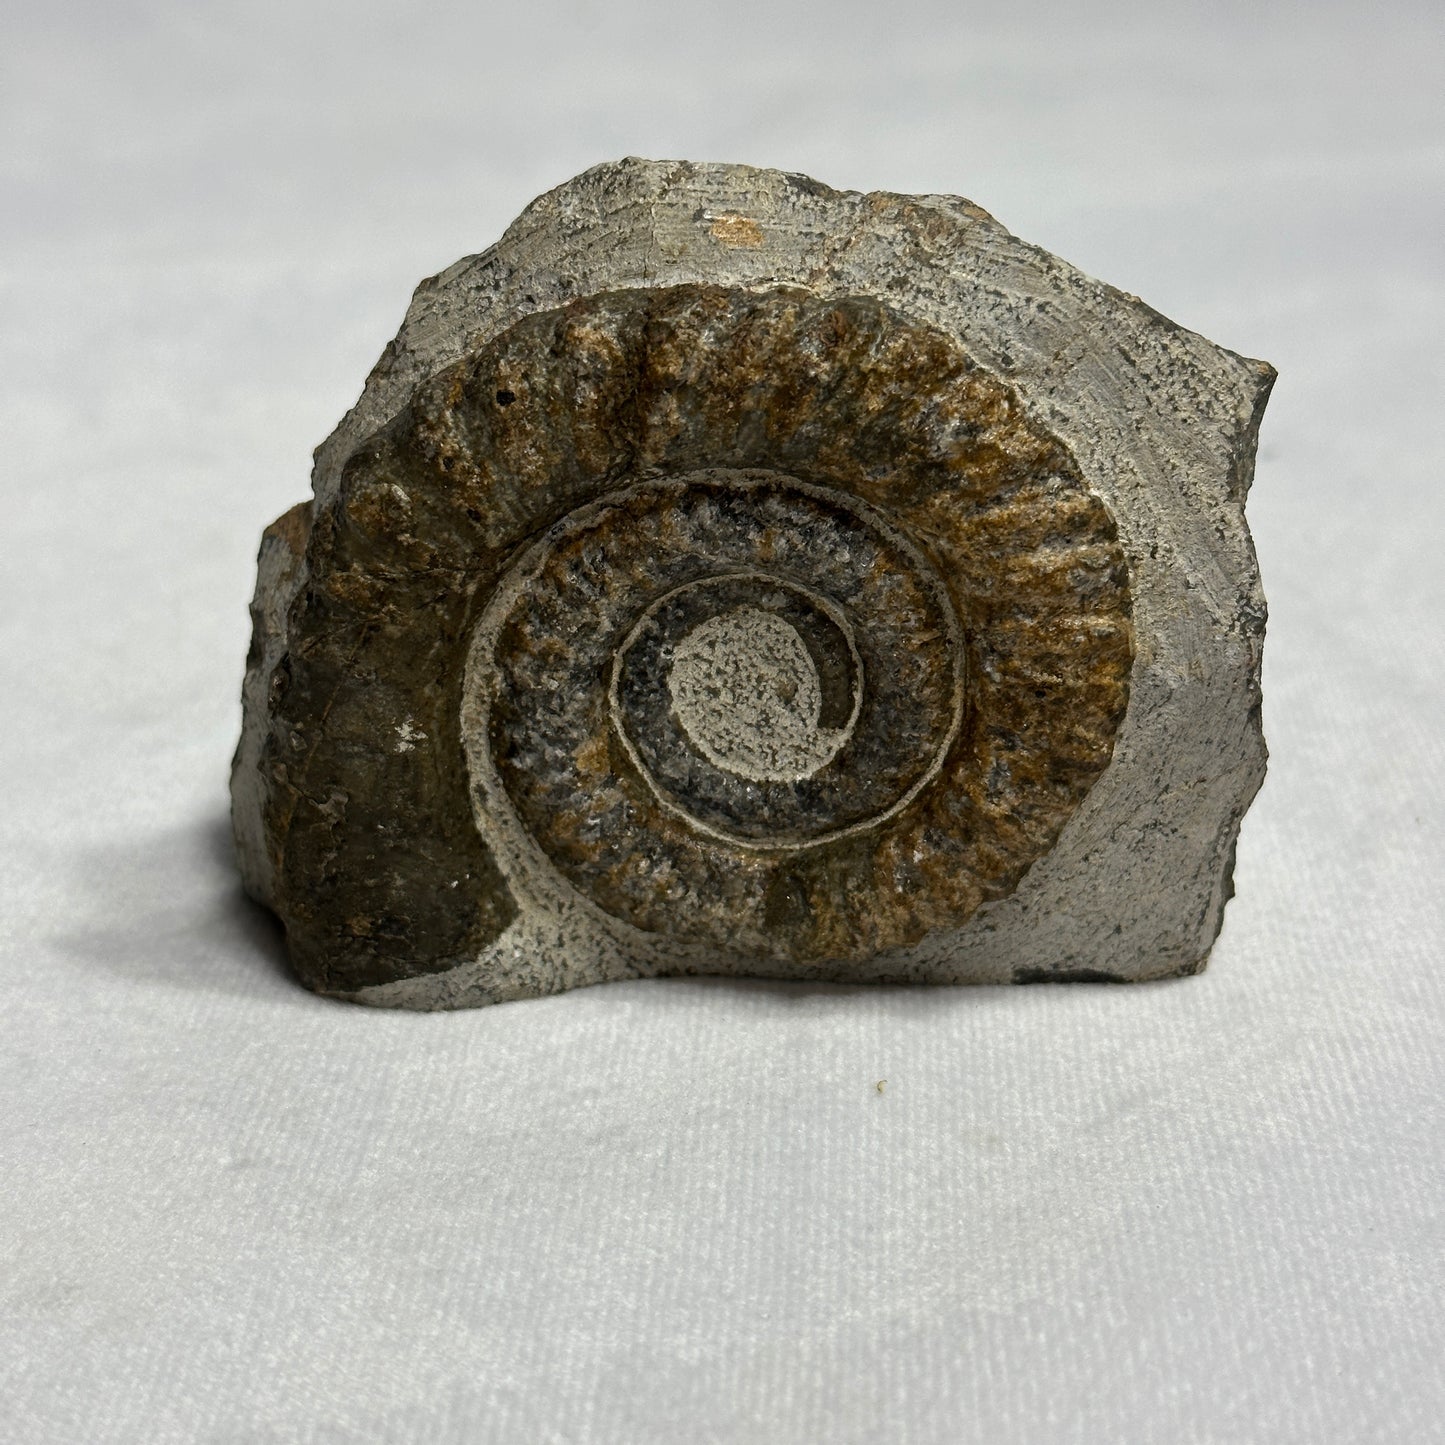 Ammonite from Morocco